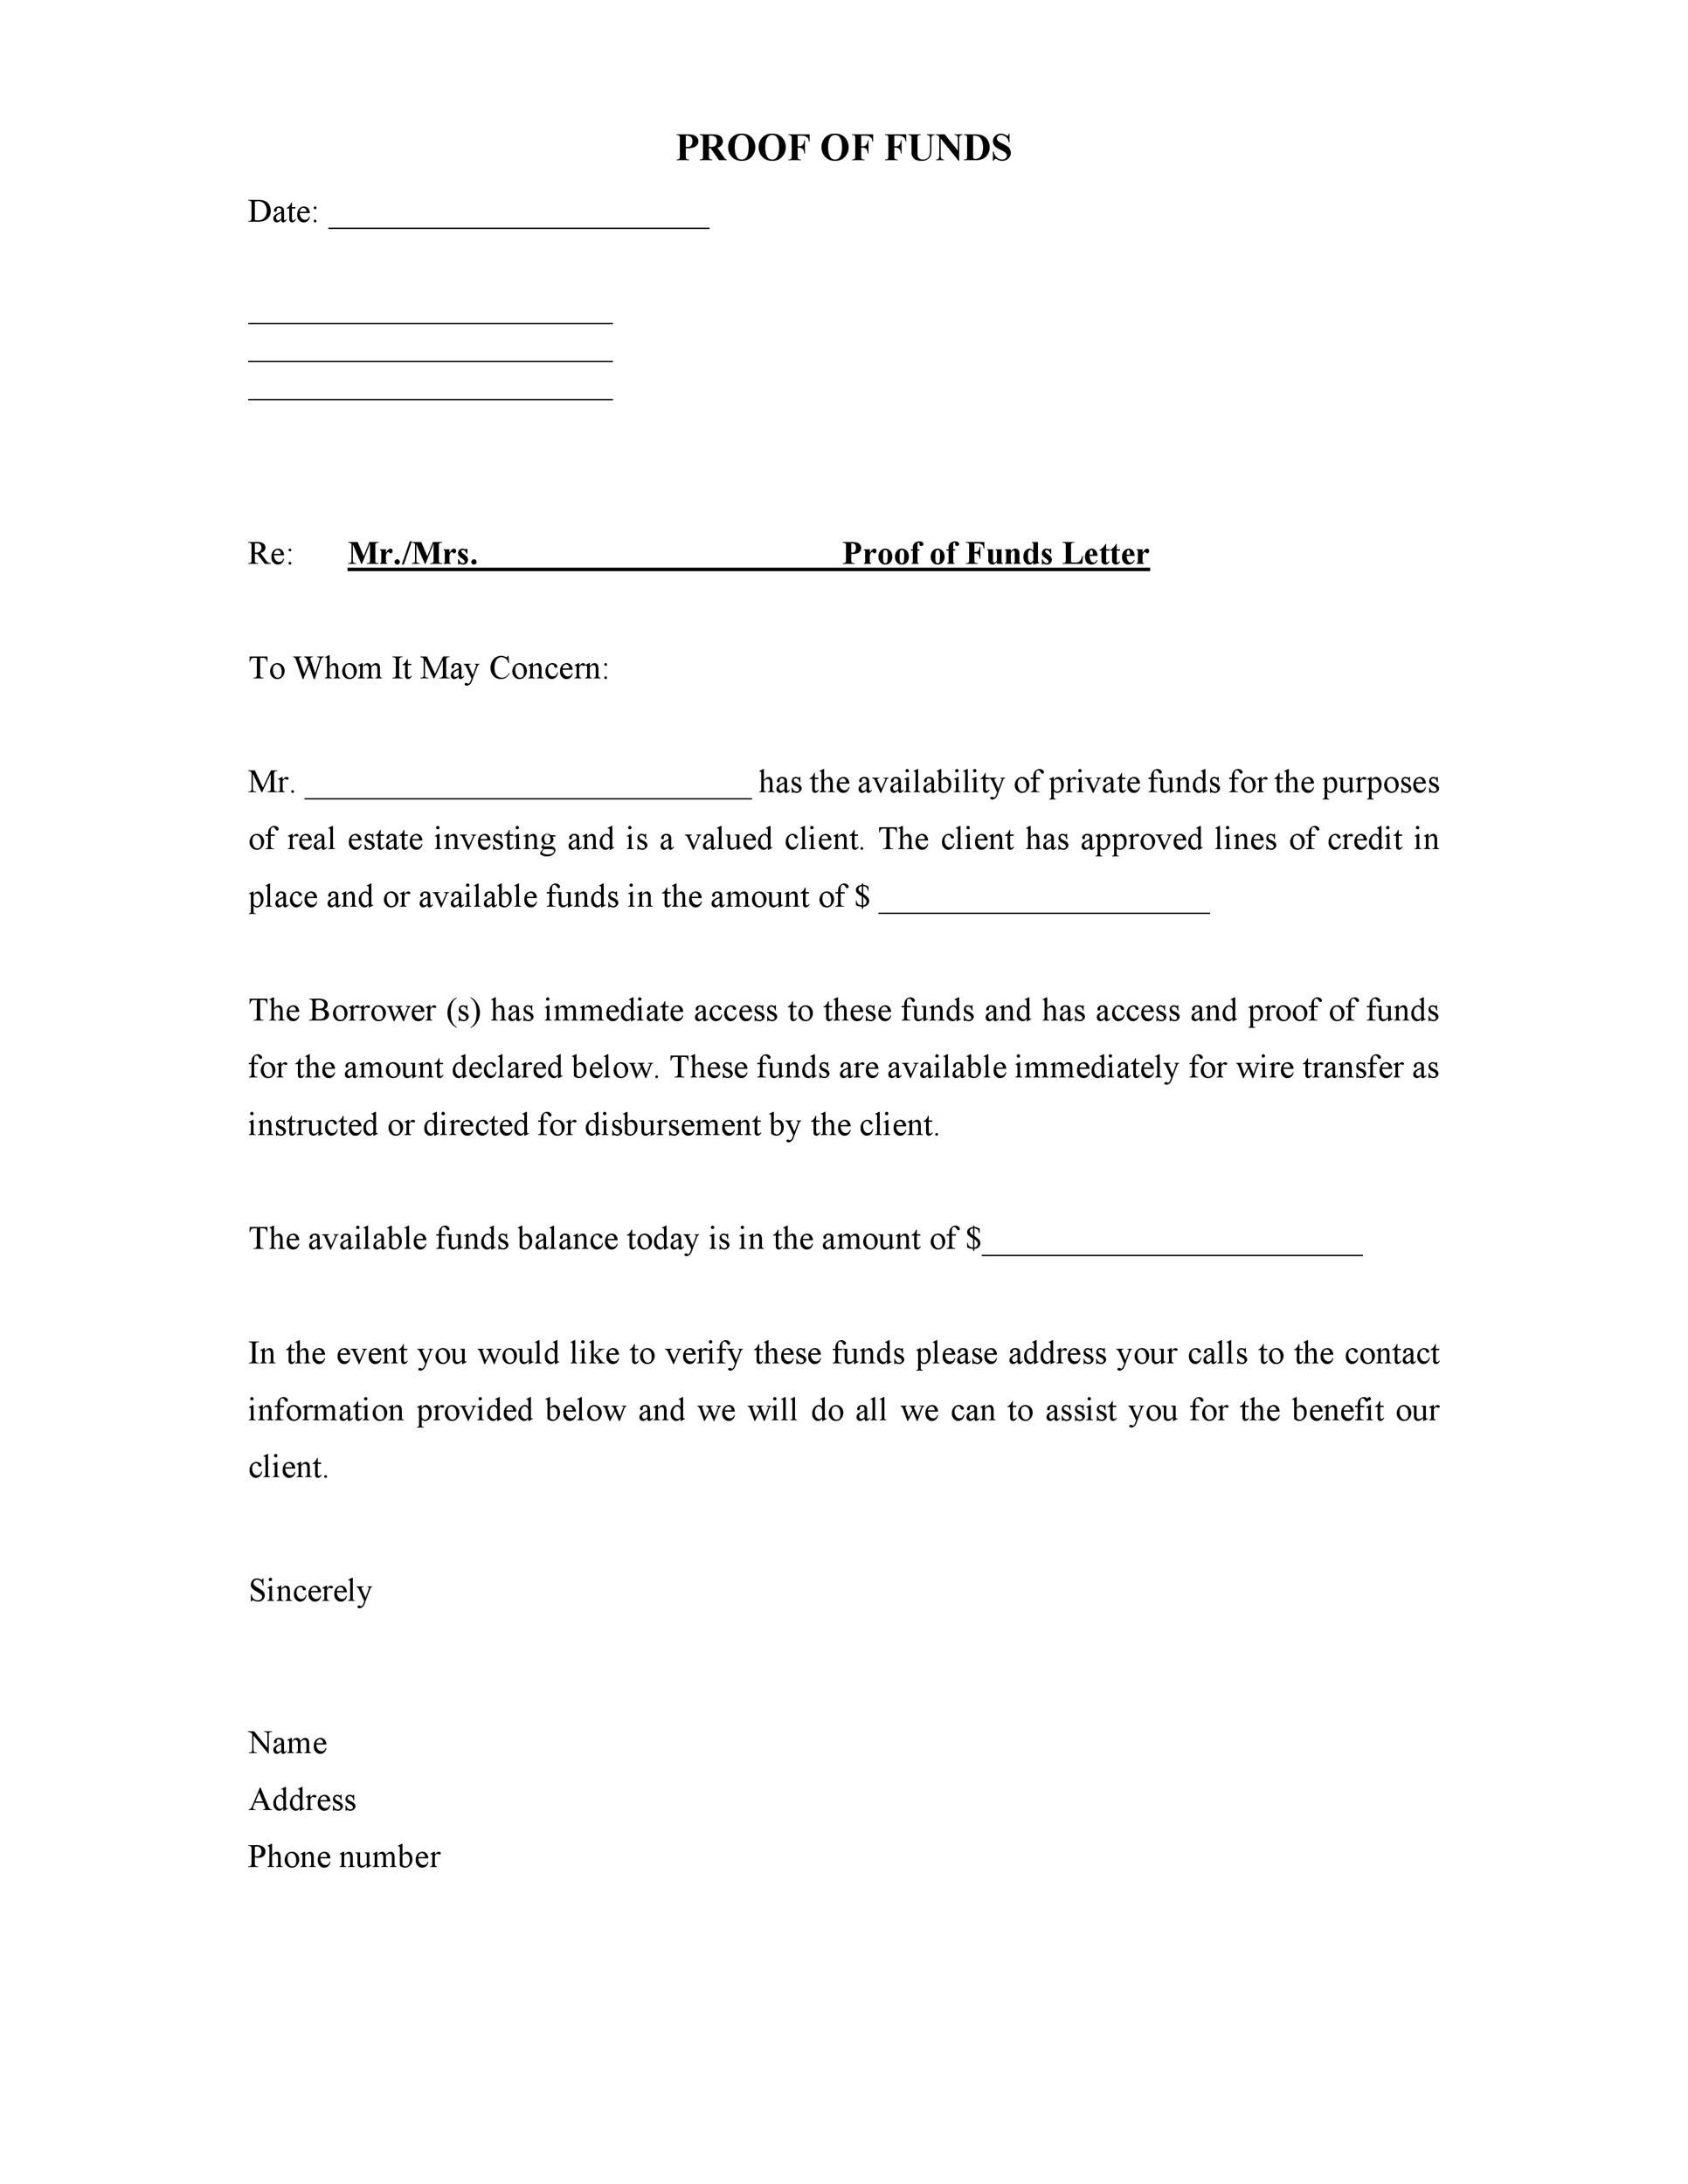 proof of funds letter template